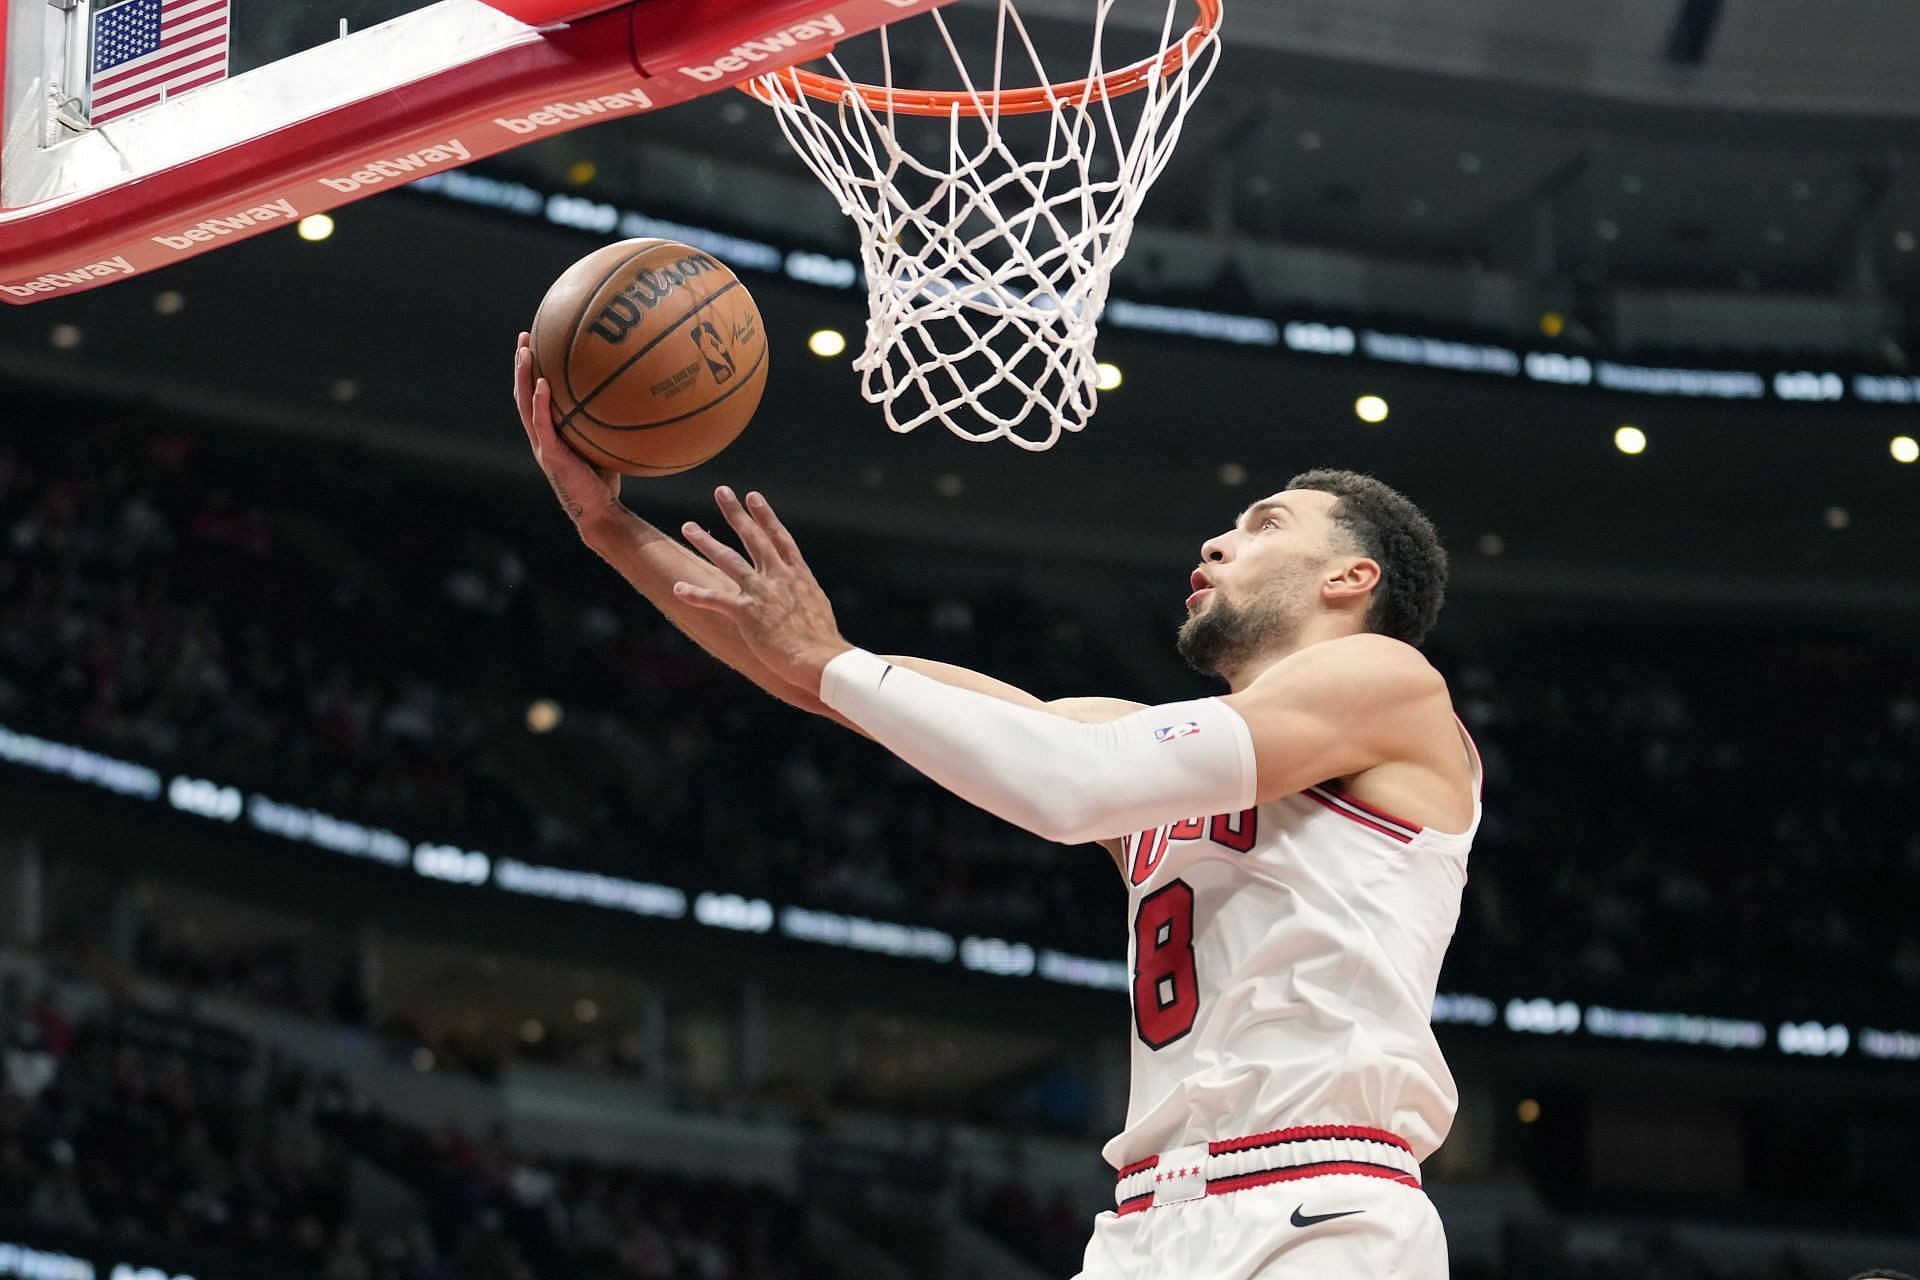 Insider rules out Zach LaVine to 76ers, names Lakers and Miami as realistic destinations